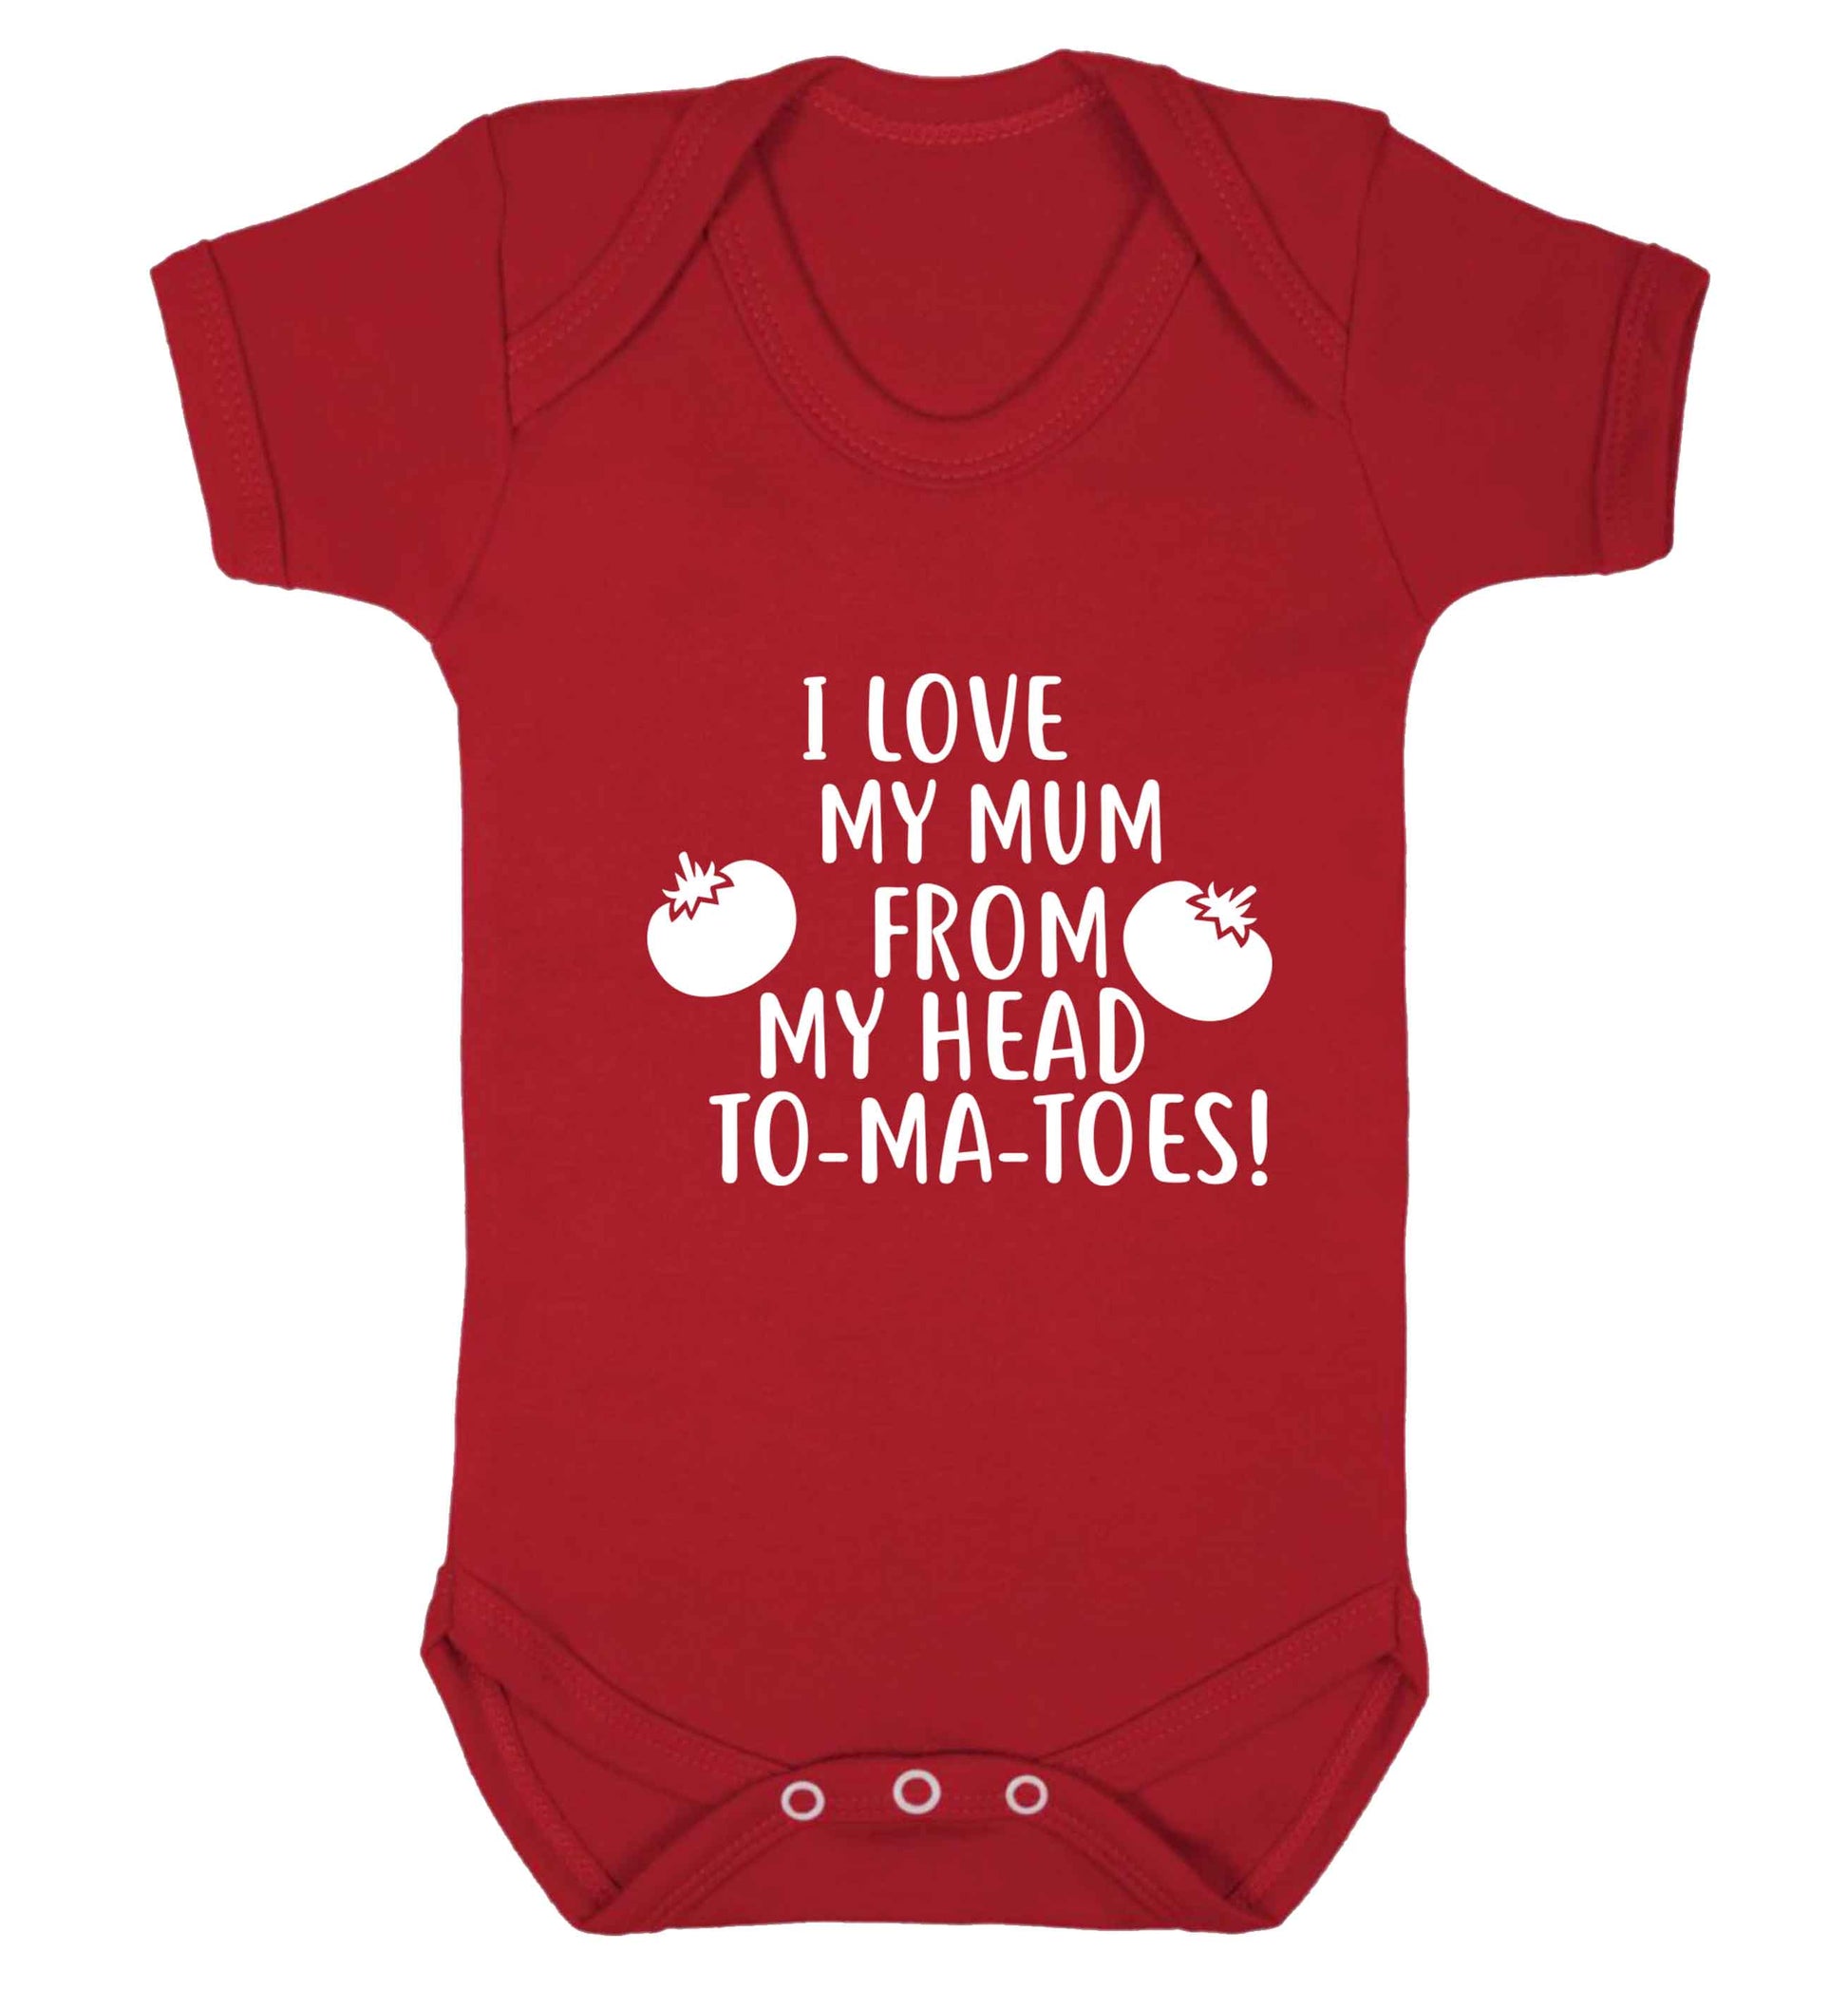 I love my mum from my head to-my-toes! baby vest red 18-24 months